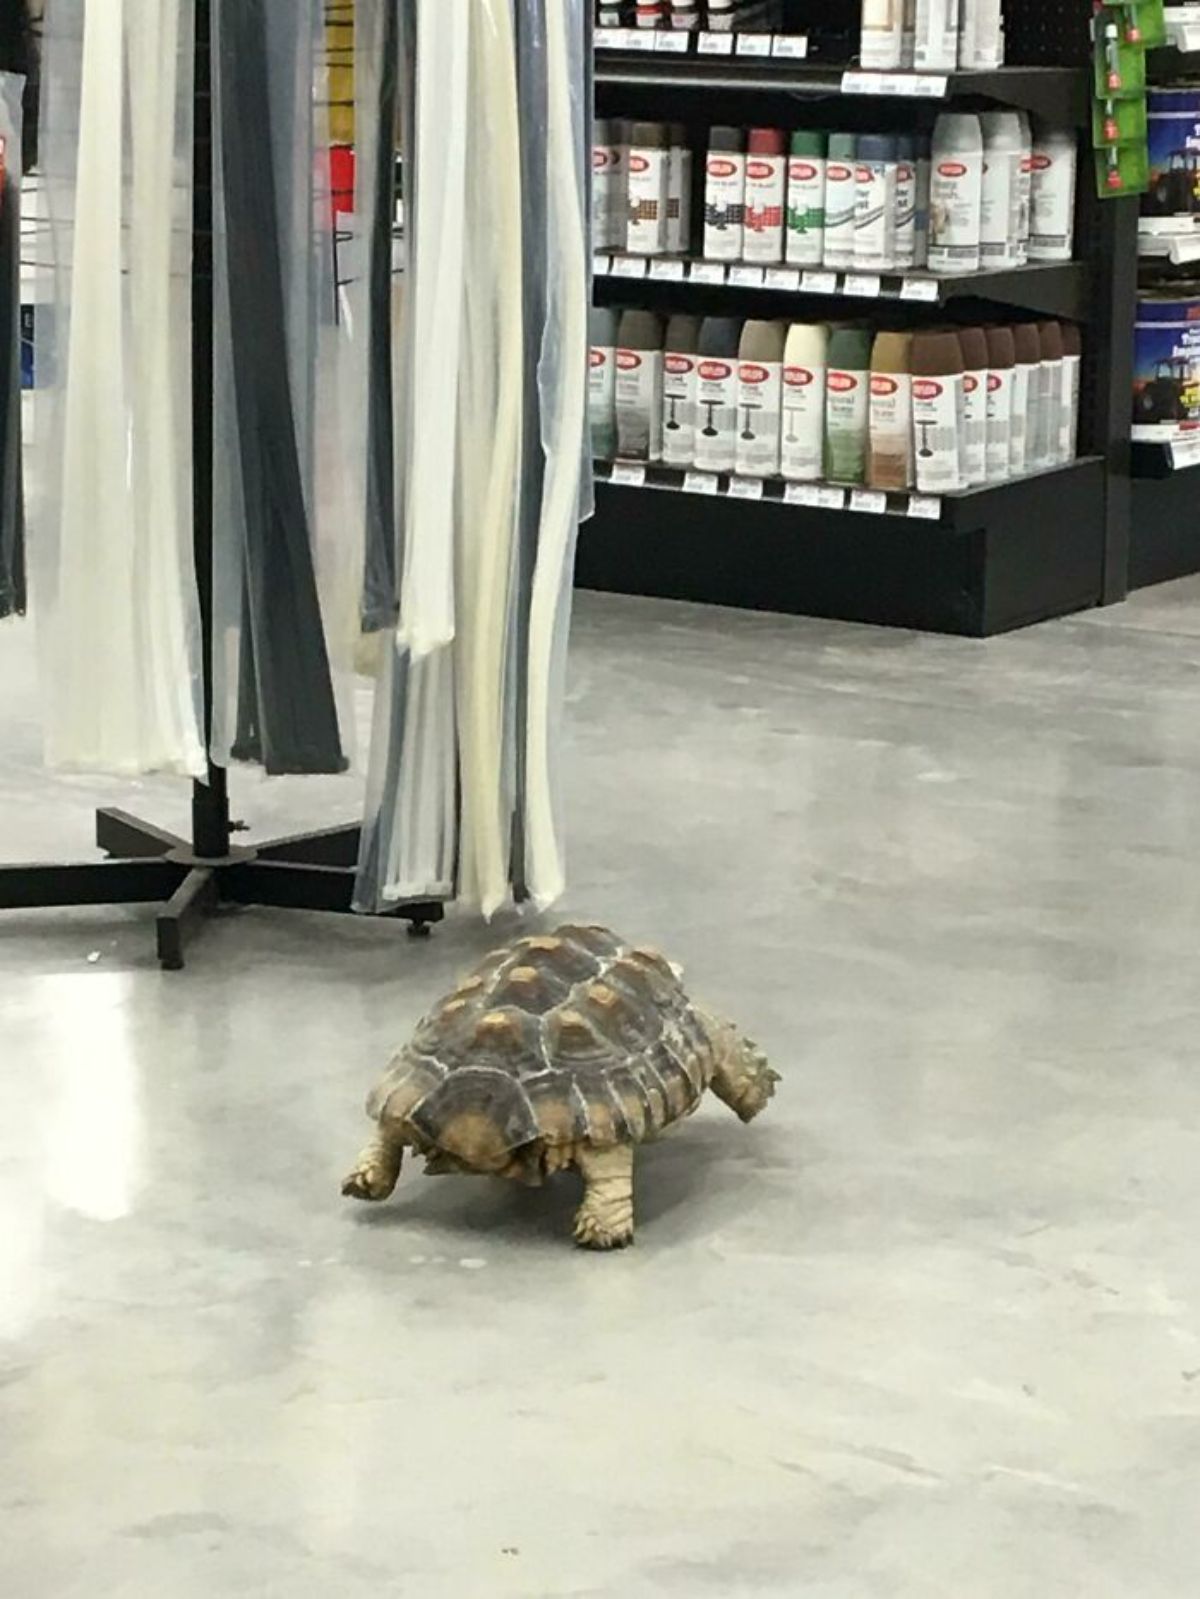 turtle walking on the floor of a hardware store